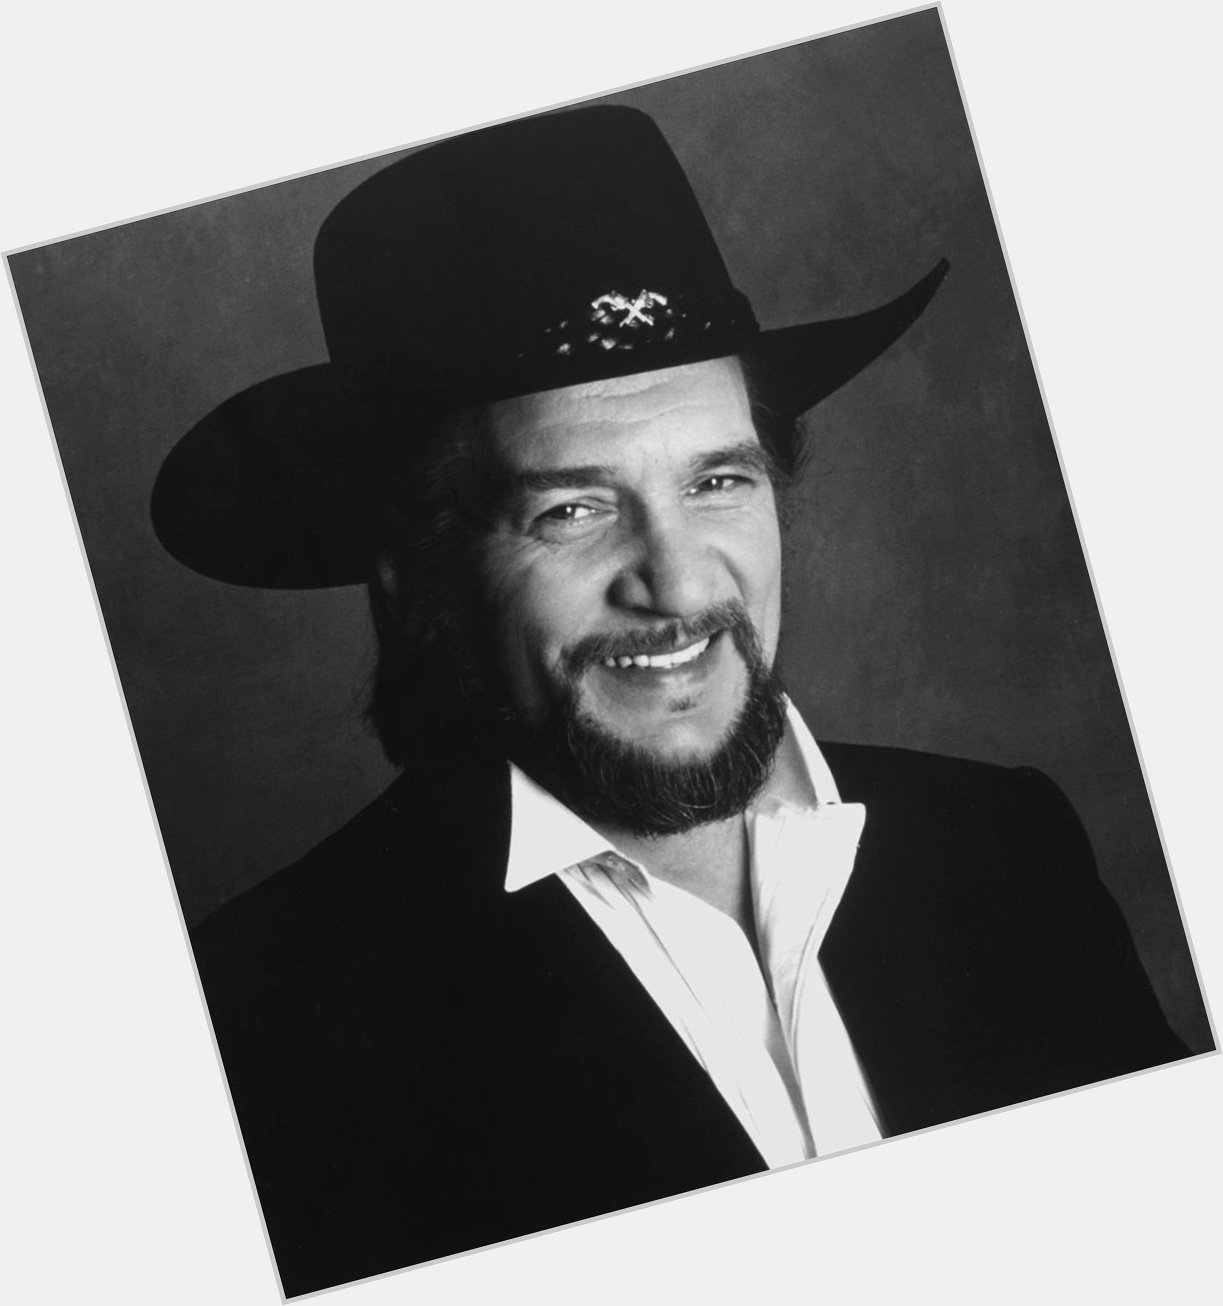 Happy Birthday to two Original Outlaws! Waylon Jennings (RIP) and   